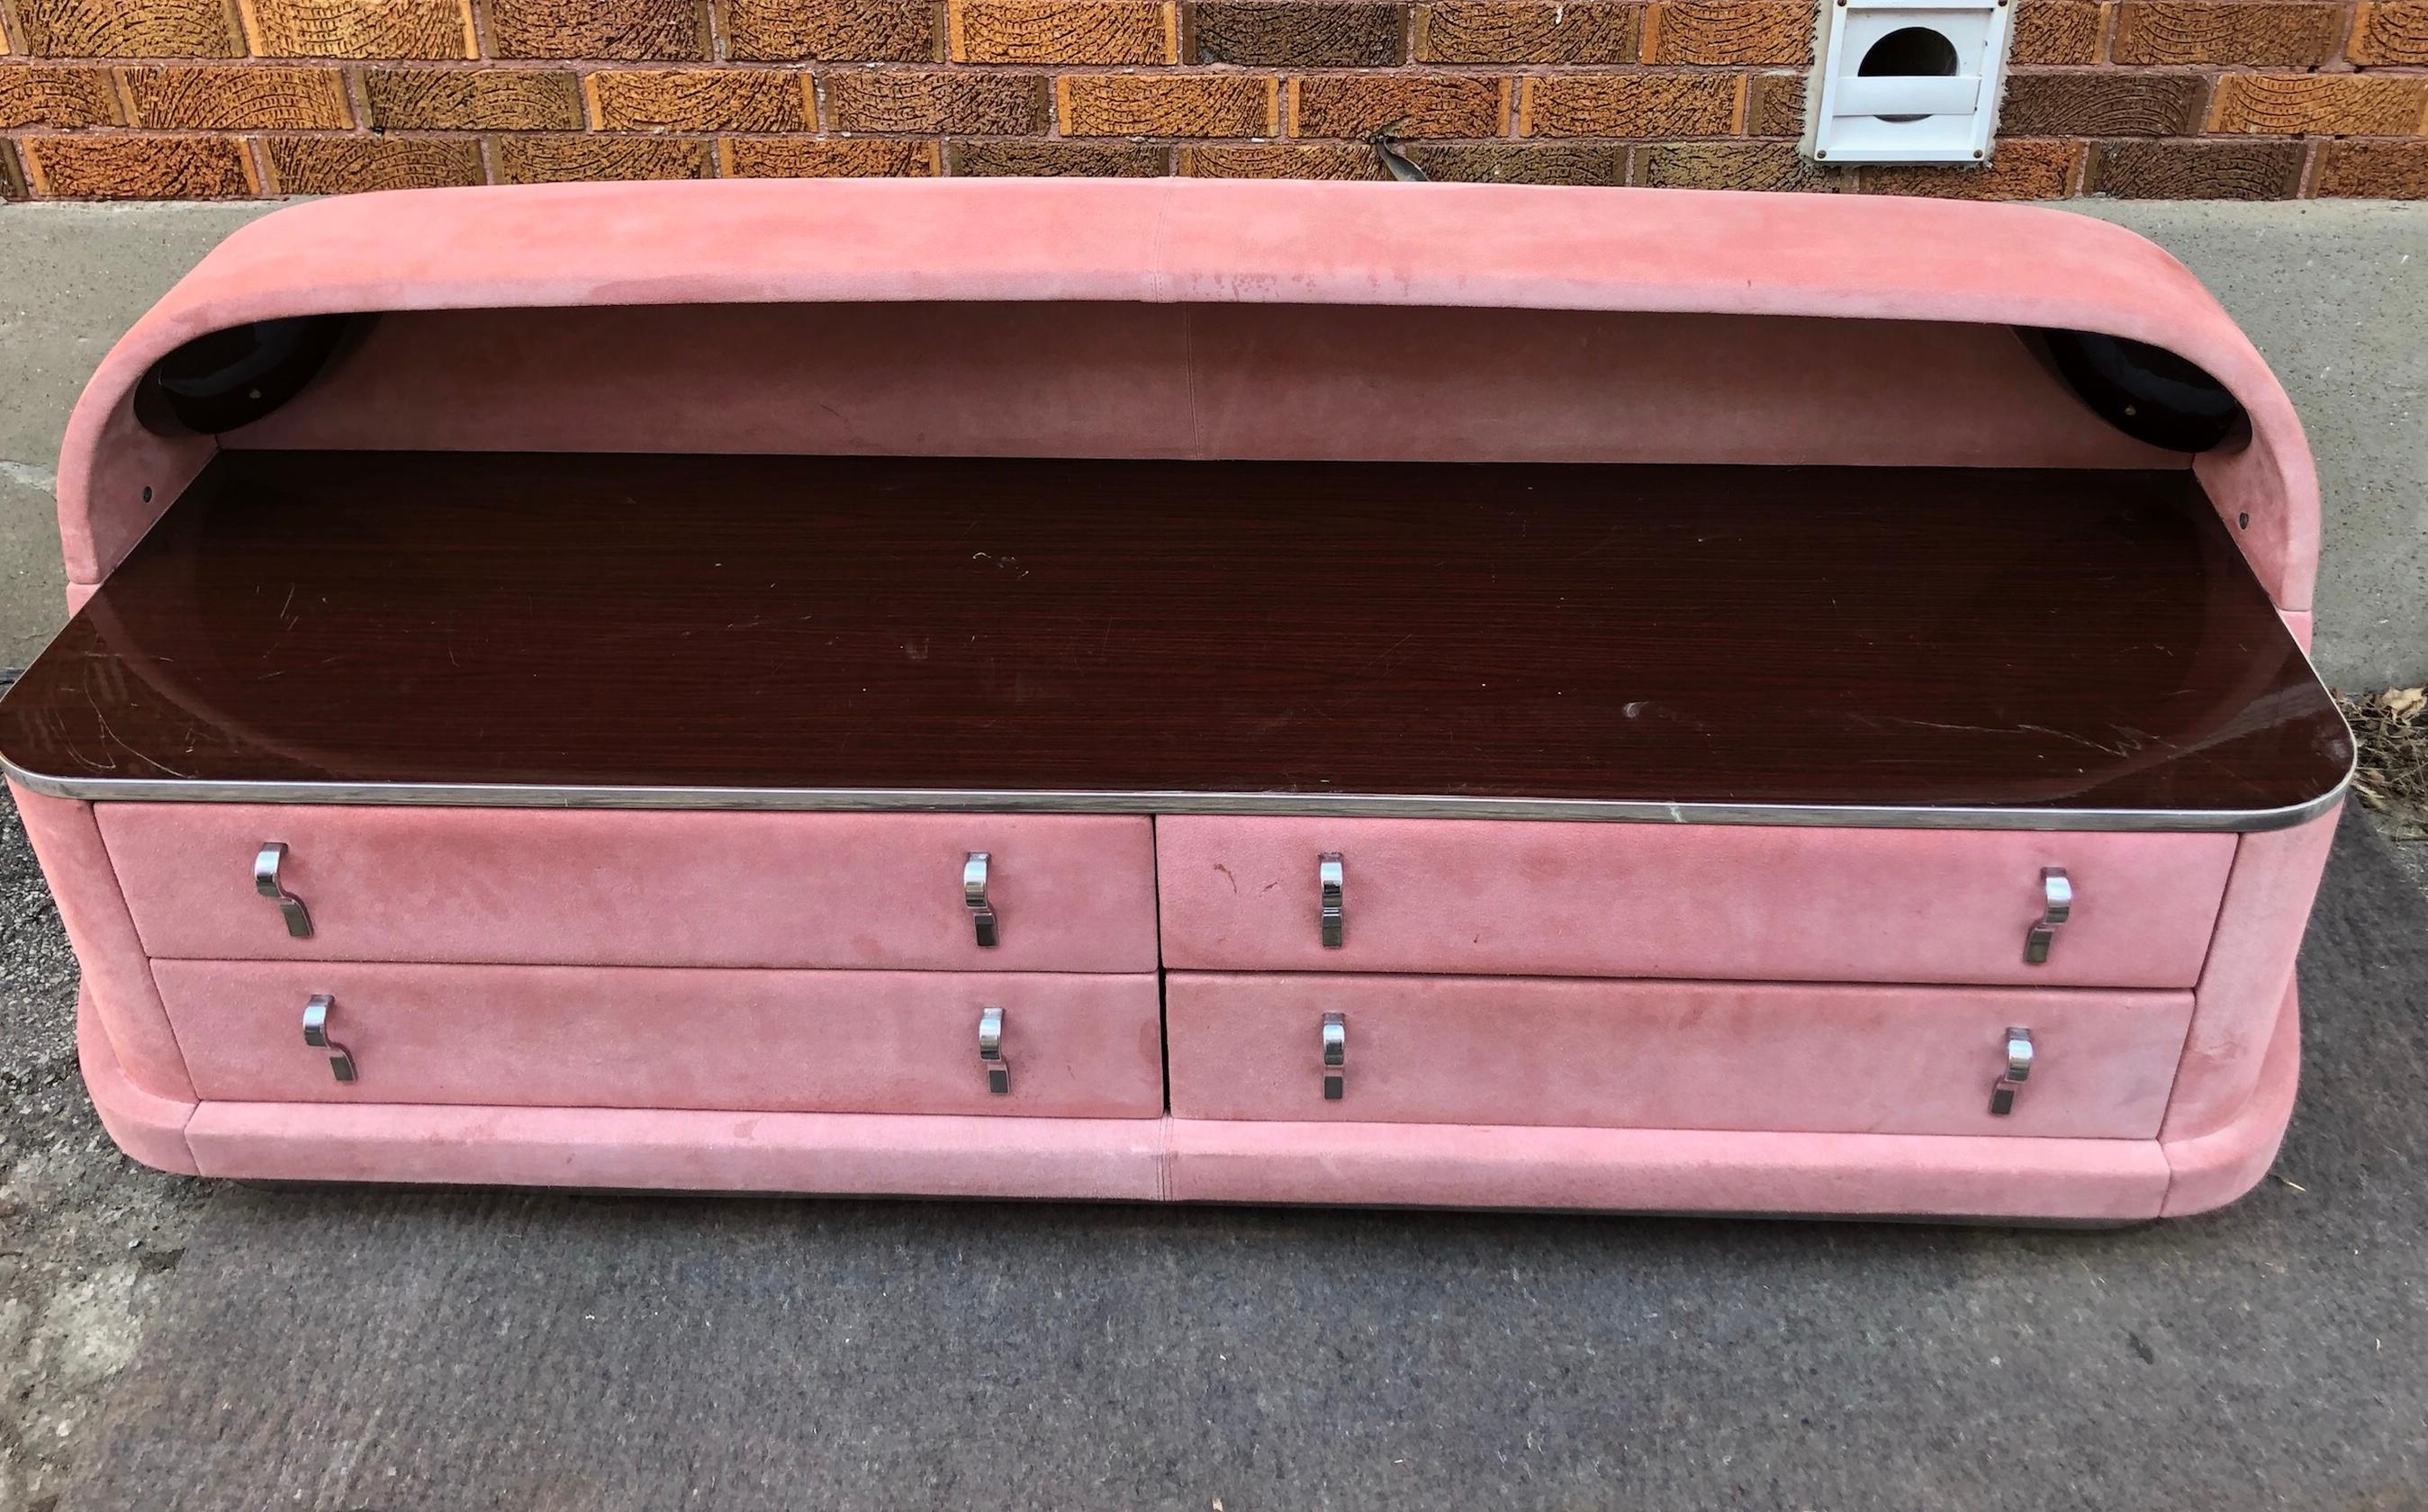 Outrageous 1980s Italian four-drawer dresser with canopy, and recessed lights, unusual pink suede wrapped with rosewood laminate top and drawer interiors, detailed with chrome drawer pulls and chrome base, make a statement in any room. Hand delivery